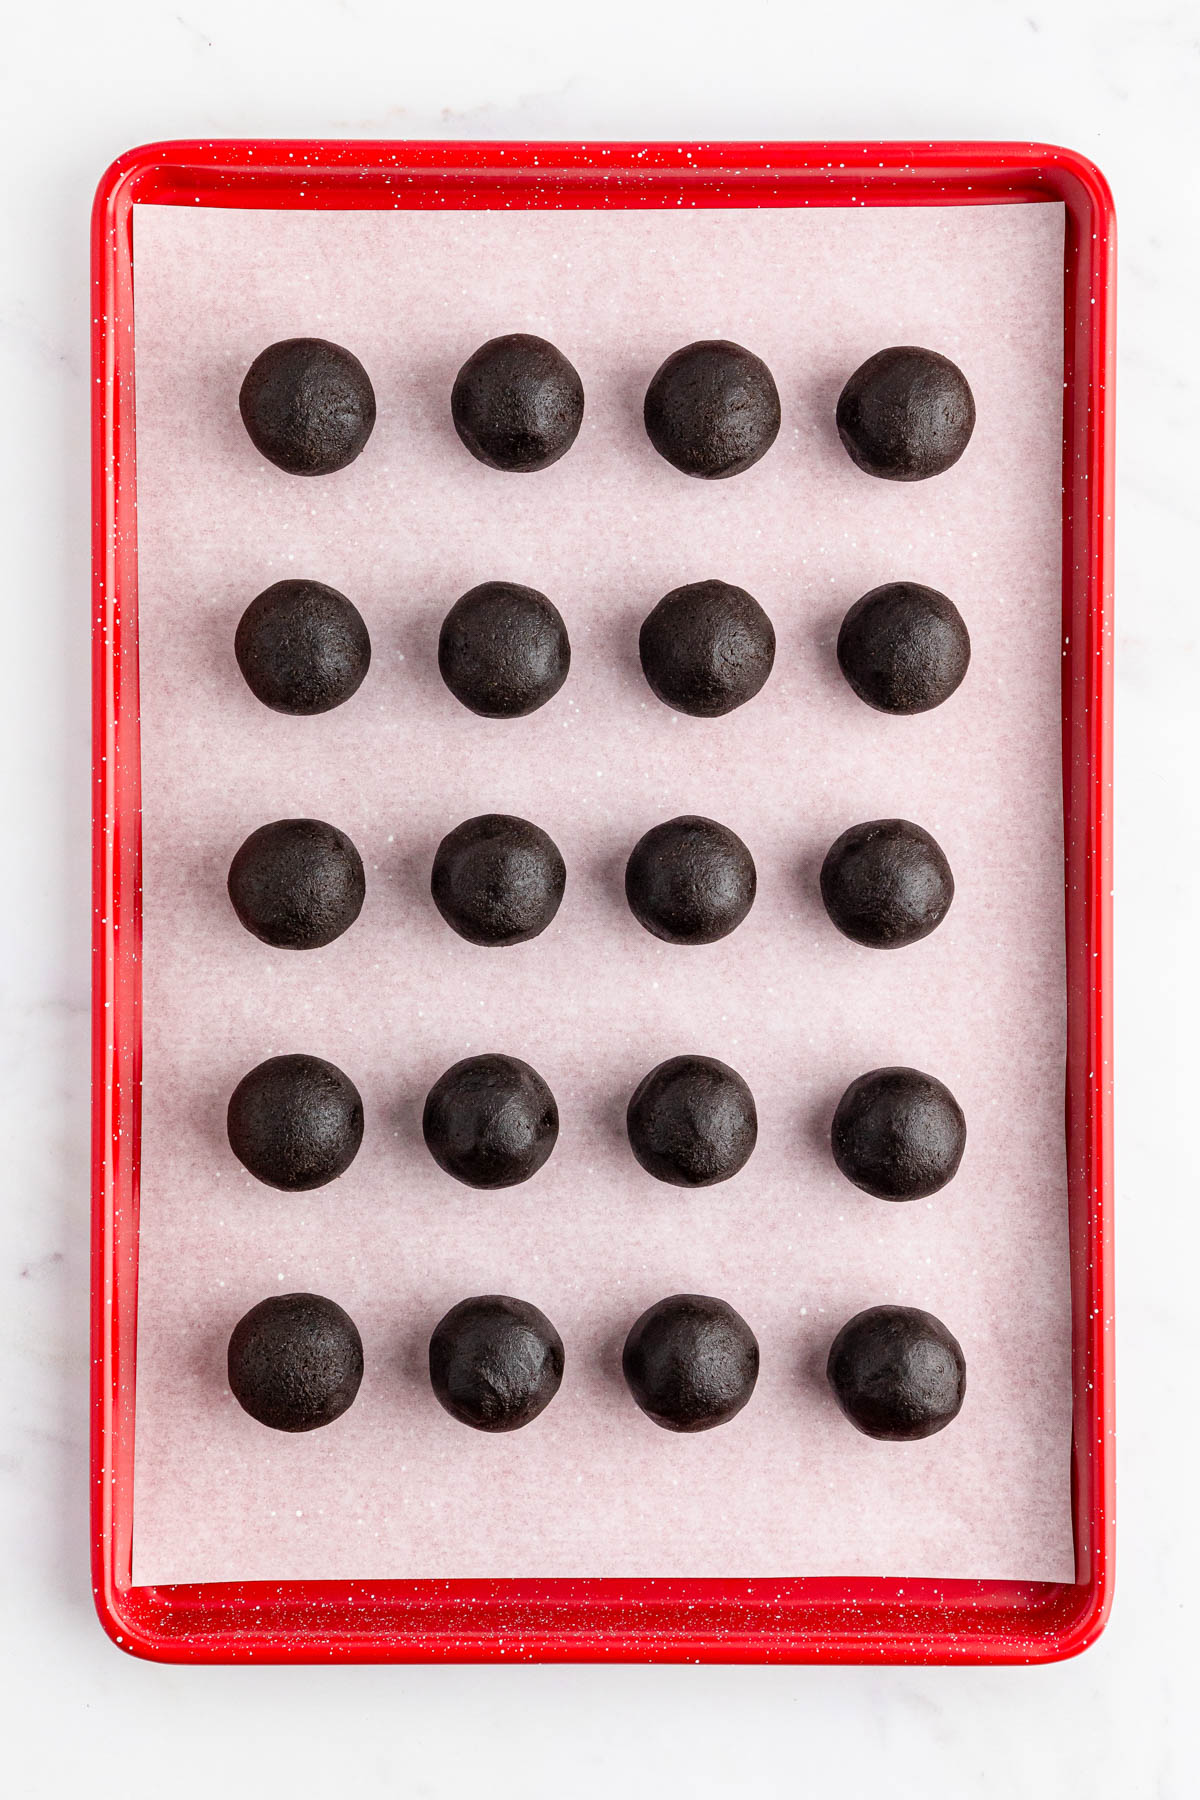 Chocolate truffles in a red tray on a marble counter.